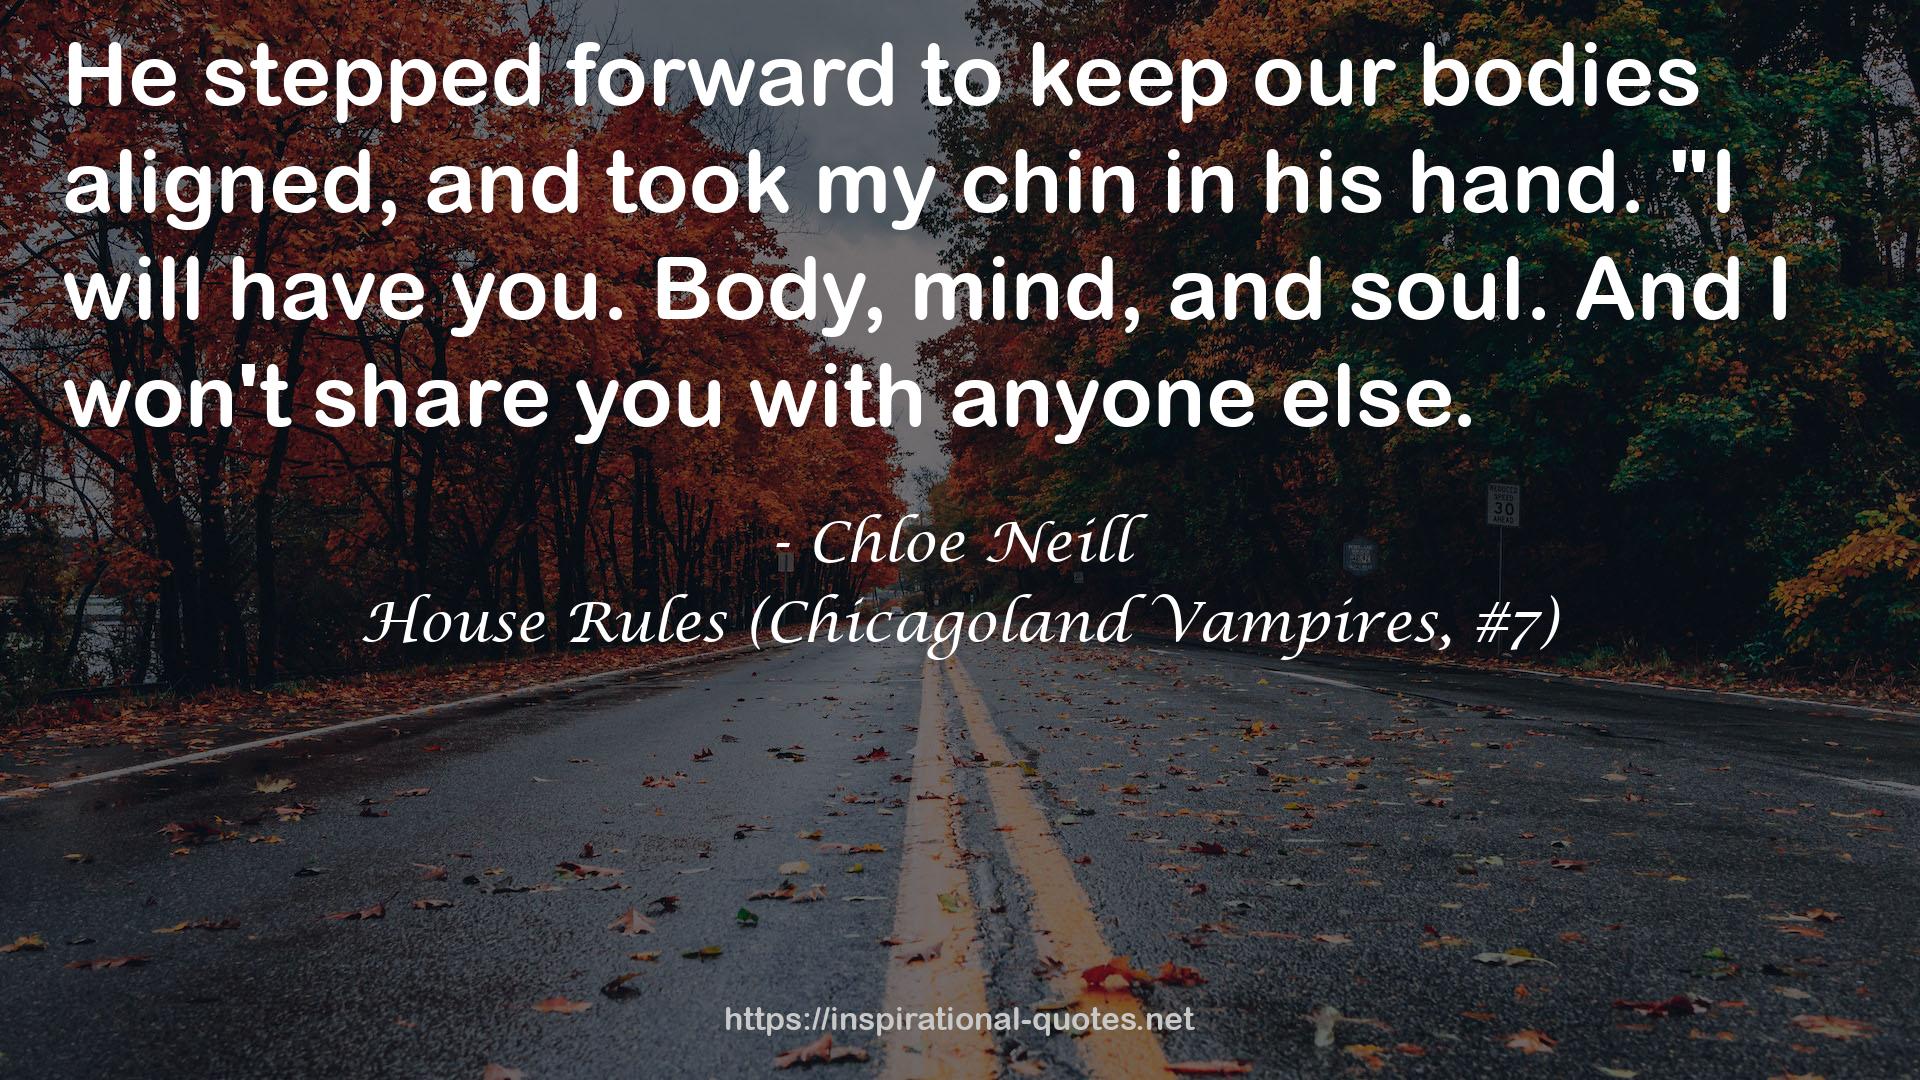 House Rules (Chicagoland Vampires, #7) QUOTES